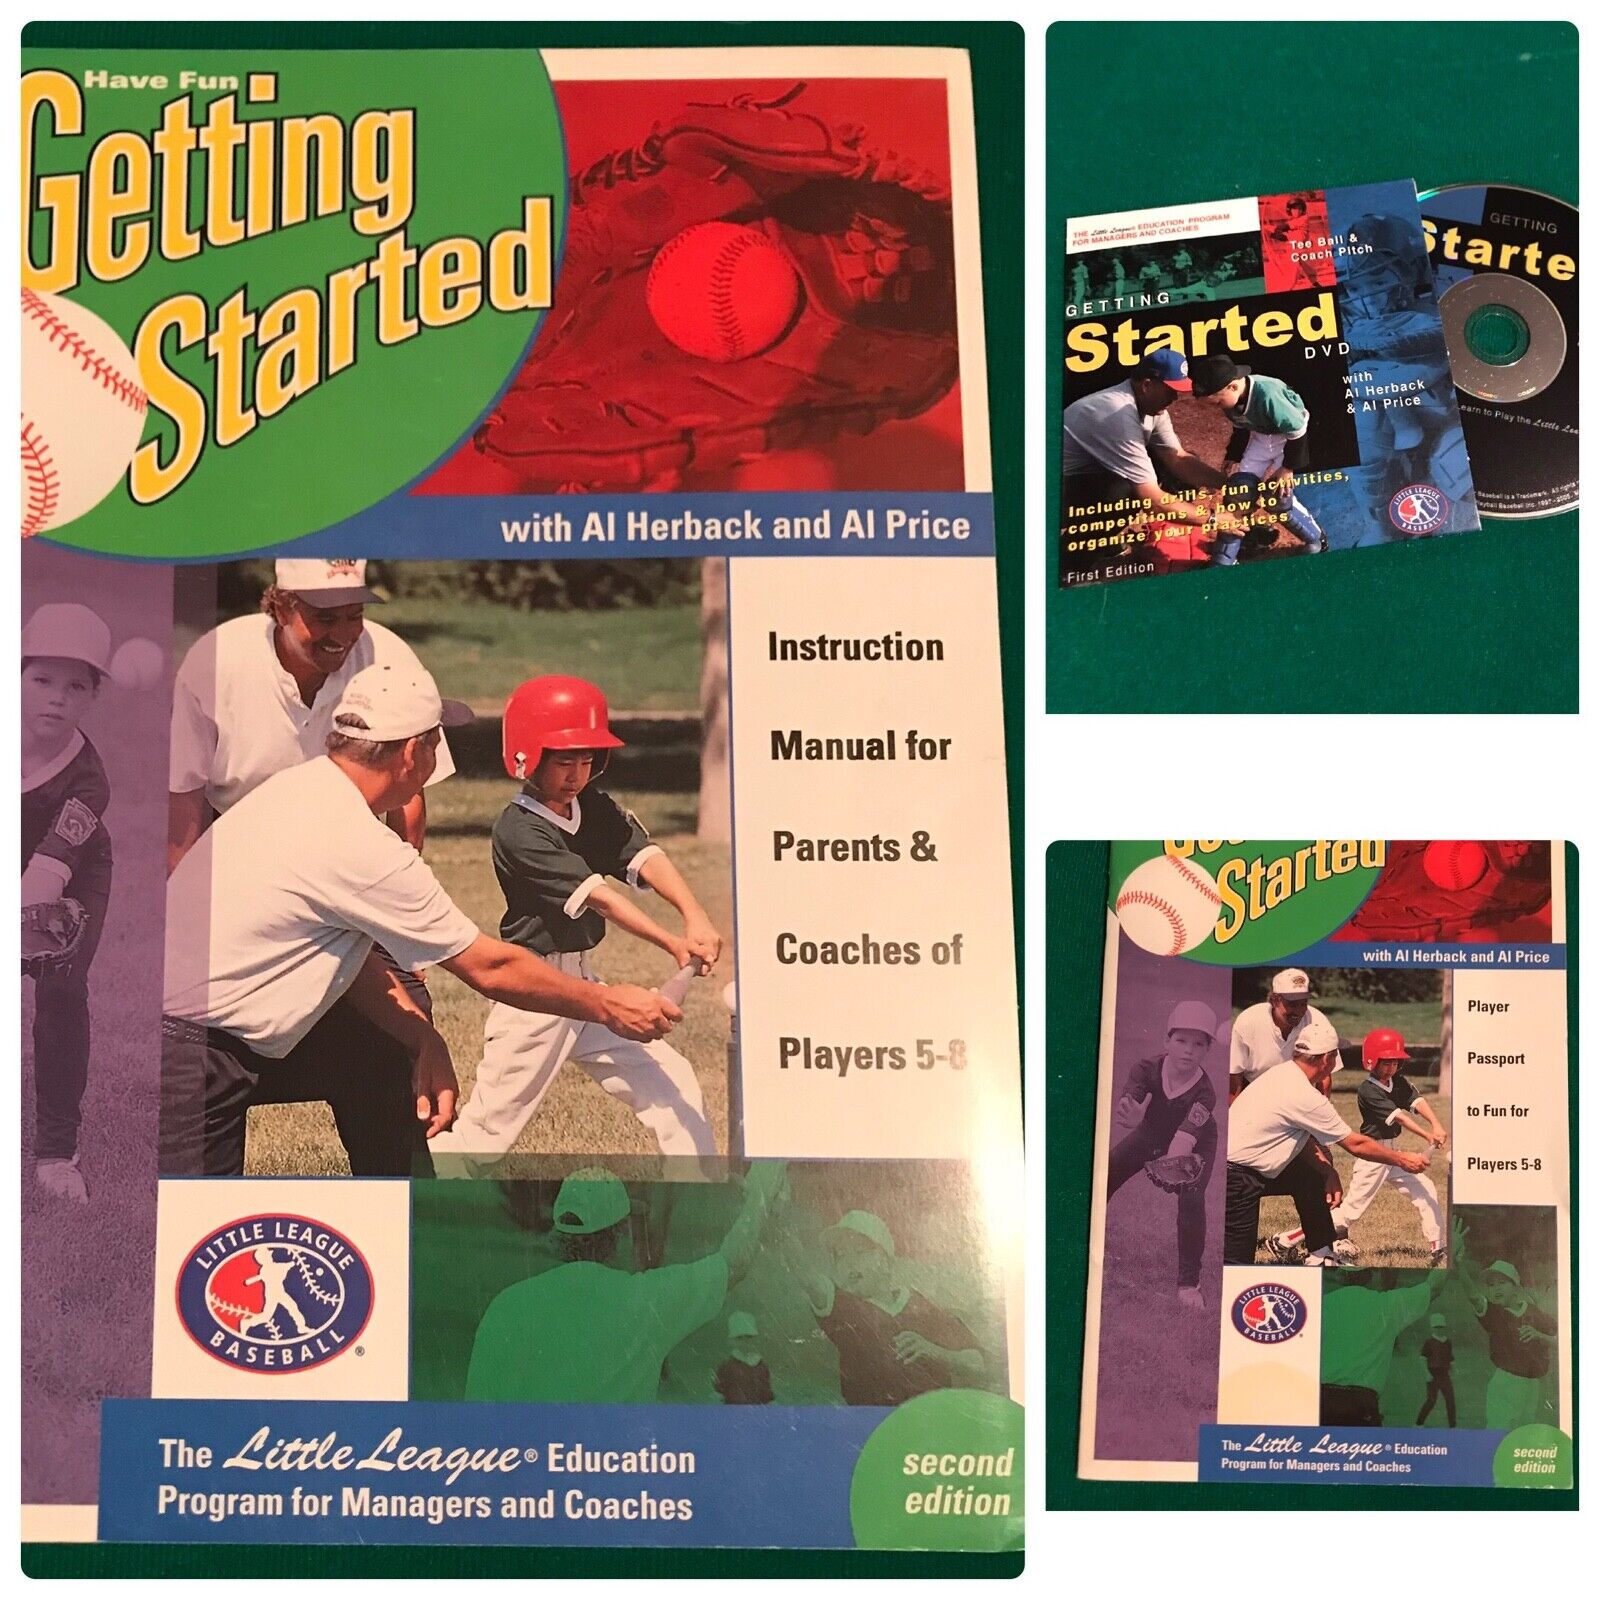 Little League Baseball Training Aids — 5-8 Year Olds Unbranded Does Not Apply